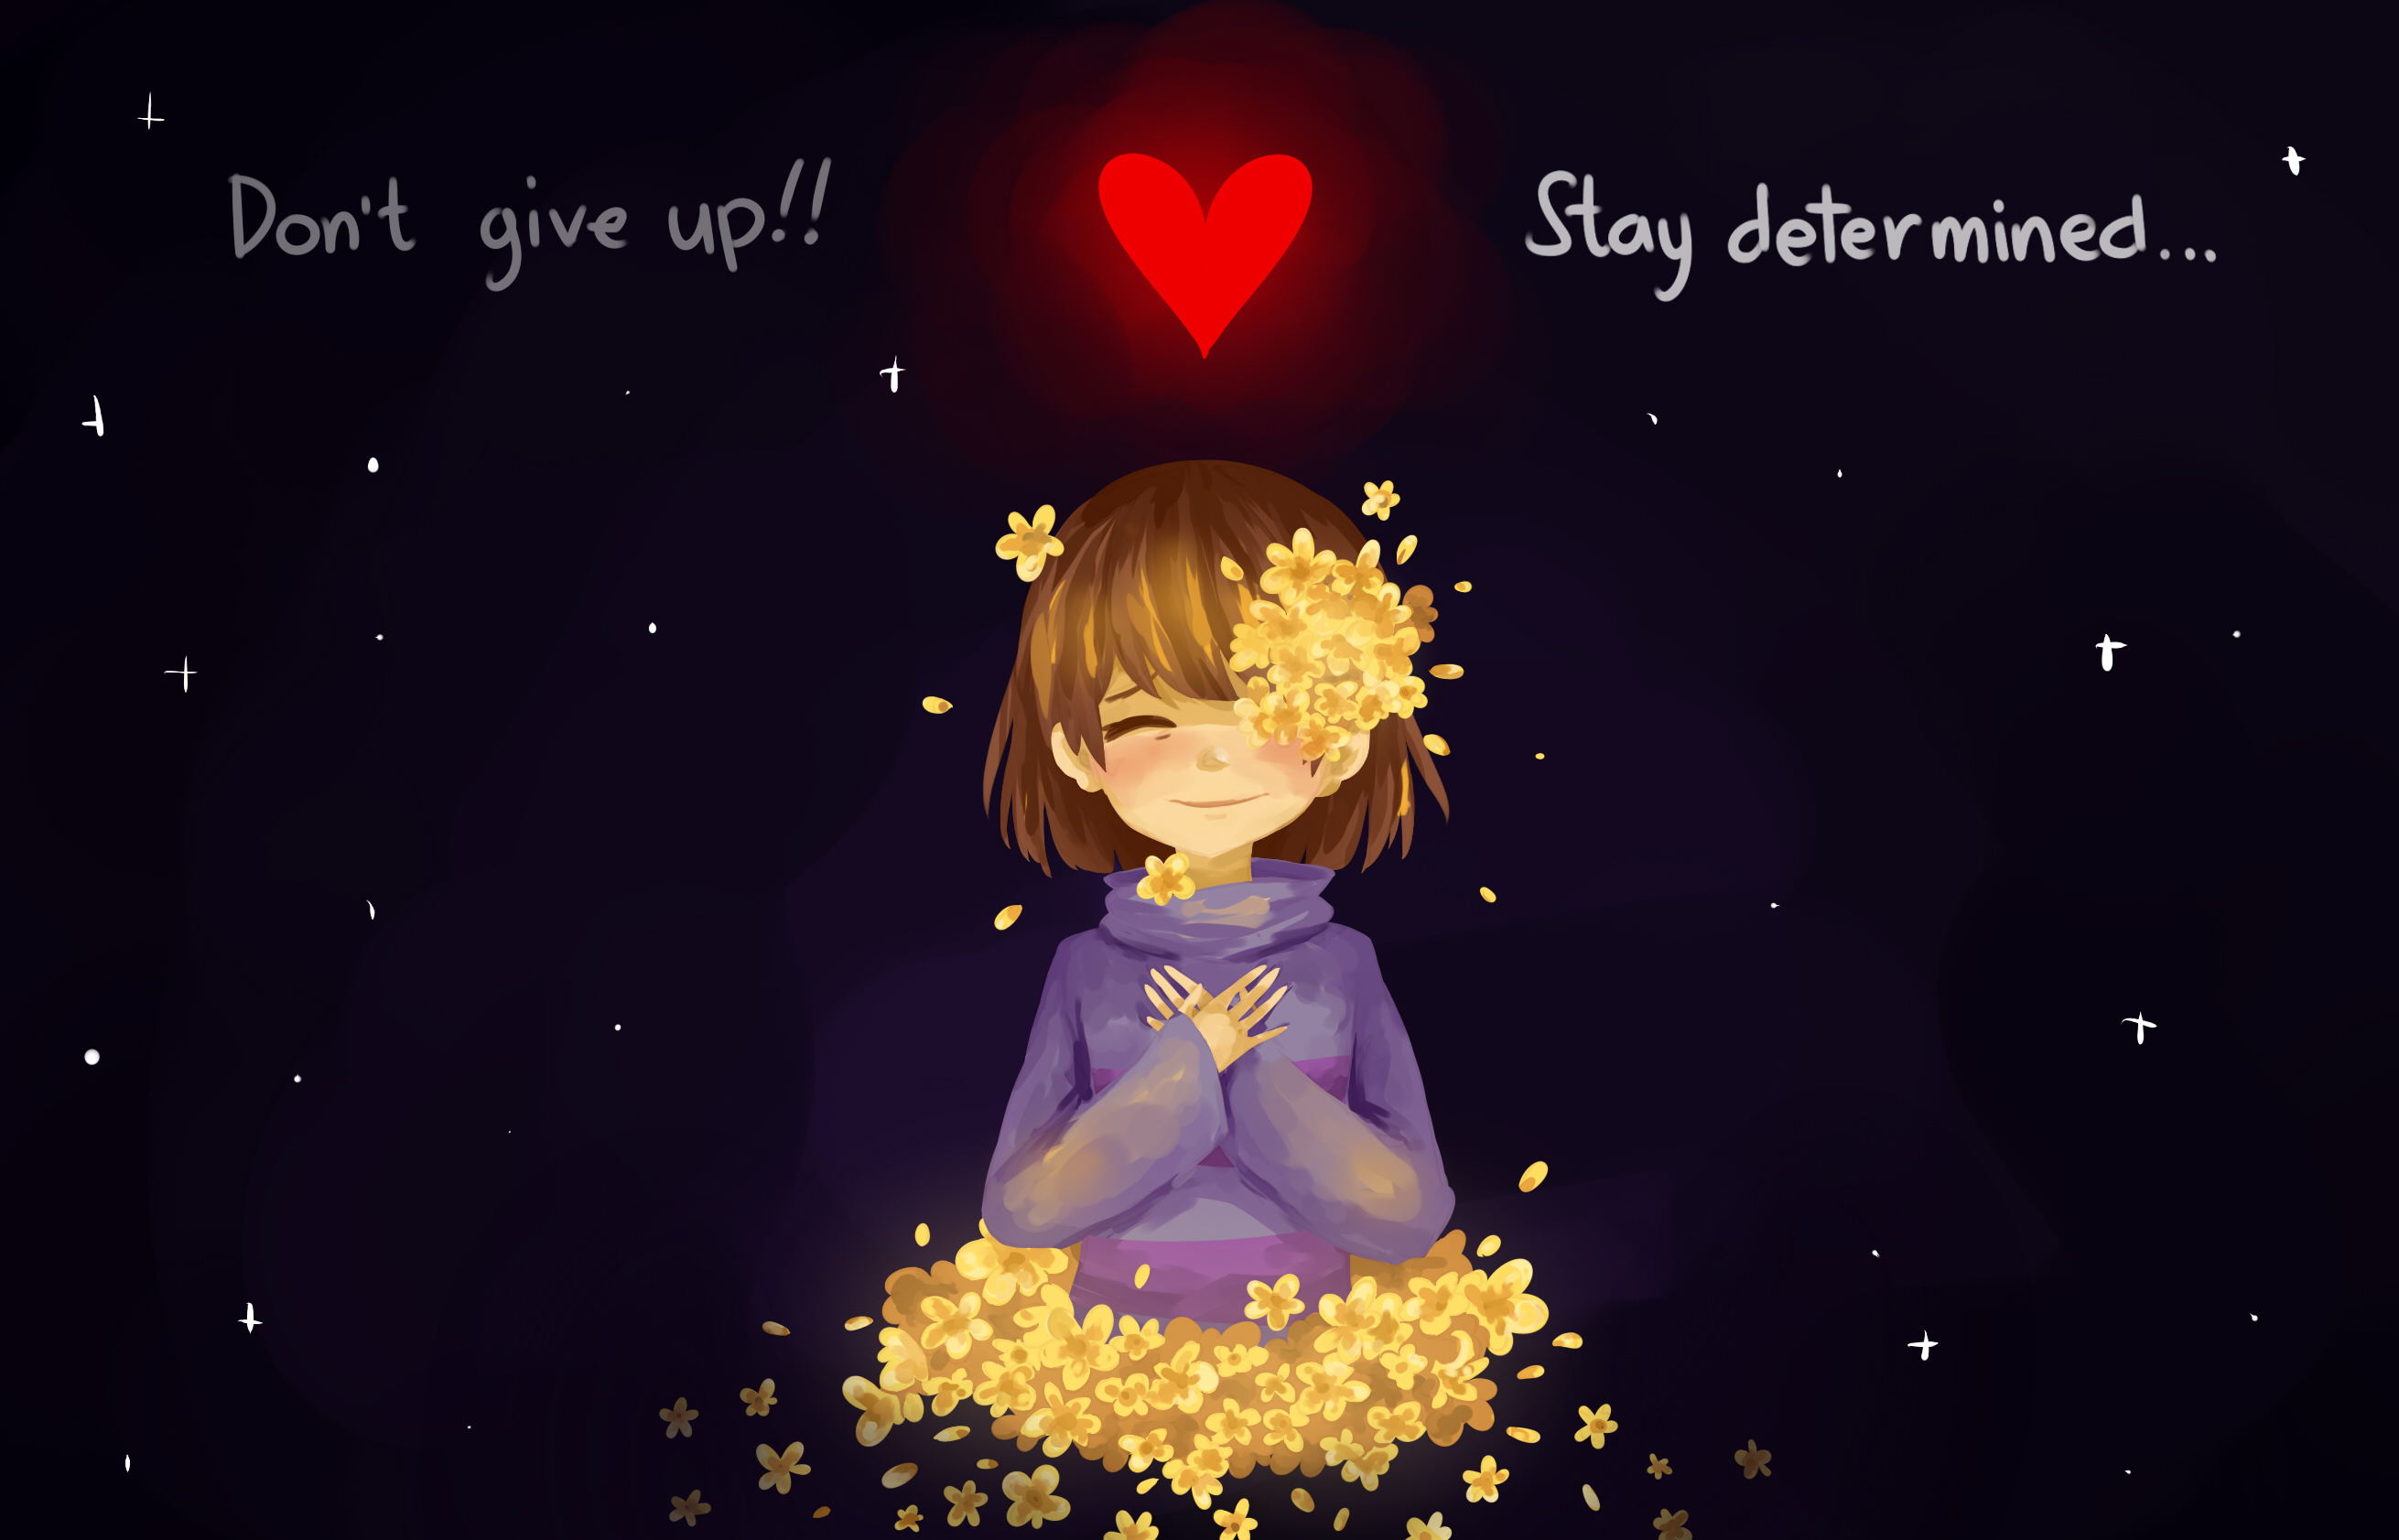 Stay Determined by Masaomicchi